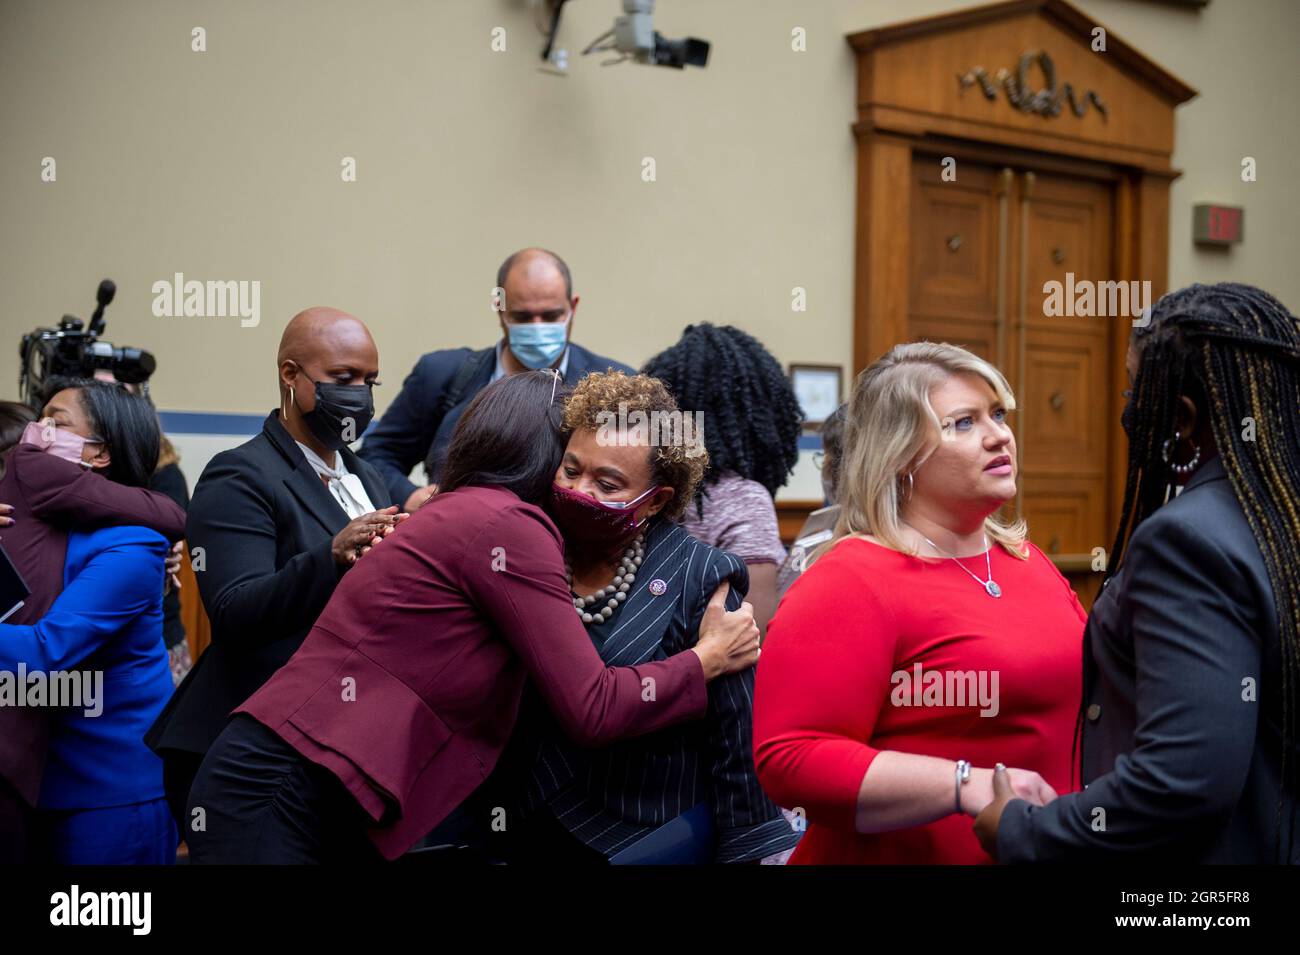 United States Representative Barbara Lee (Democrat of California), center, gets a hug from United States Representative Rashida Tlaib (Democrat of Michigan), left, while United States Representative Cori Bush (Democrat of Missouri), right, is comforted by United States Representative Kat Cammack (Republican of Florida), second from right, following a House Committee on Oversight and Reform hearing âA State of Crisis: Examining the urgent need to protect and expand abortion rights and accessâ in the Rayburn House Office Building in Washington, DC, Wednesday, September 29, 2021. Credit: Rod Stock Photo